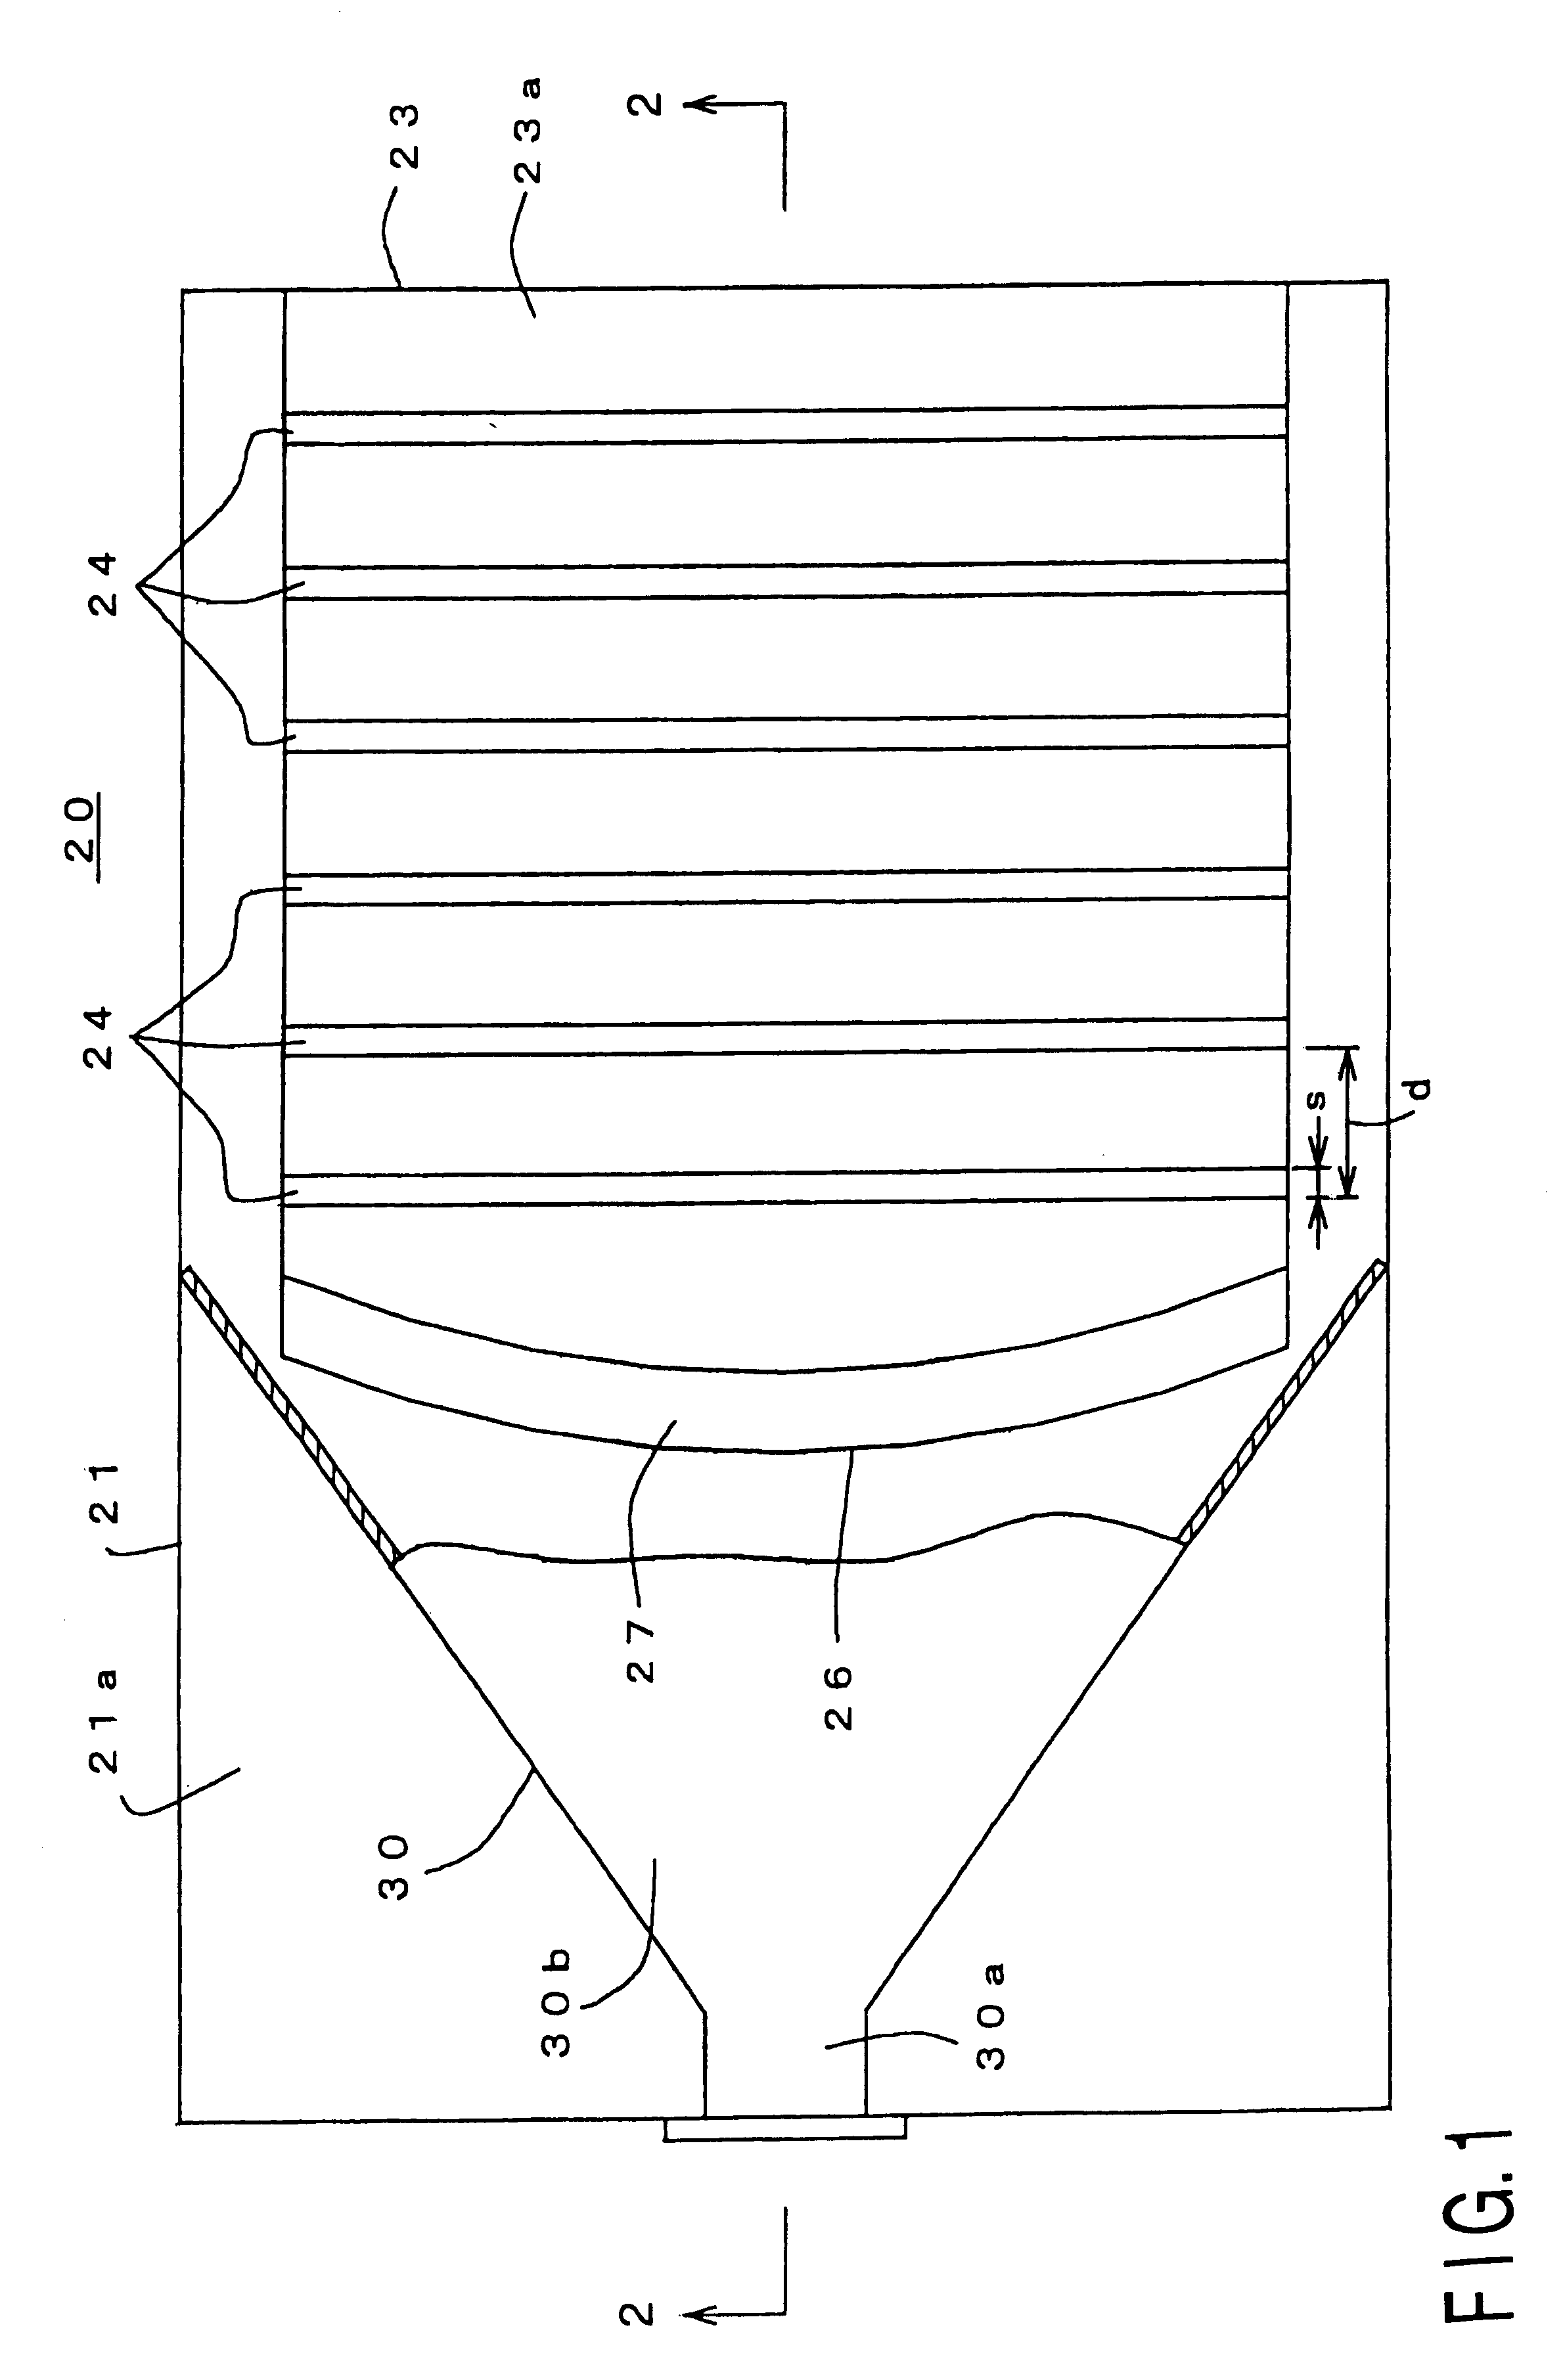 Dielectric leaky wave antenna having mono-layer structure